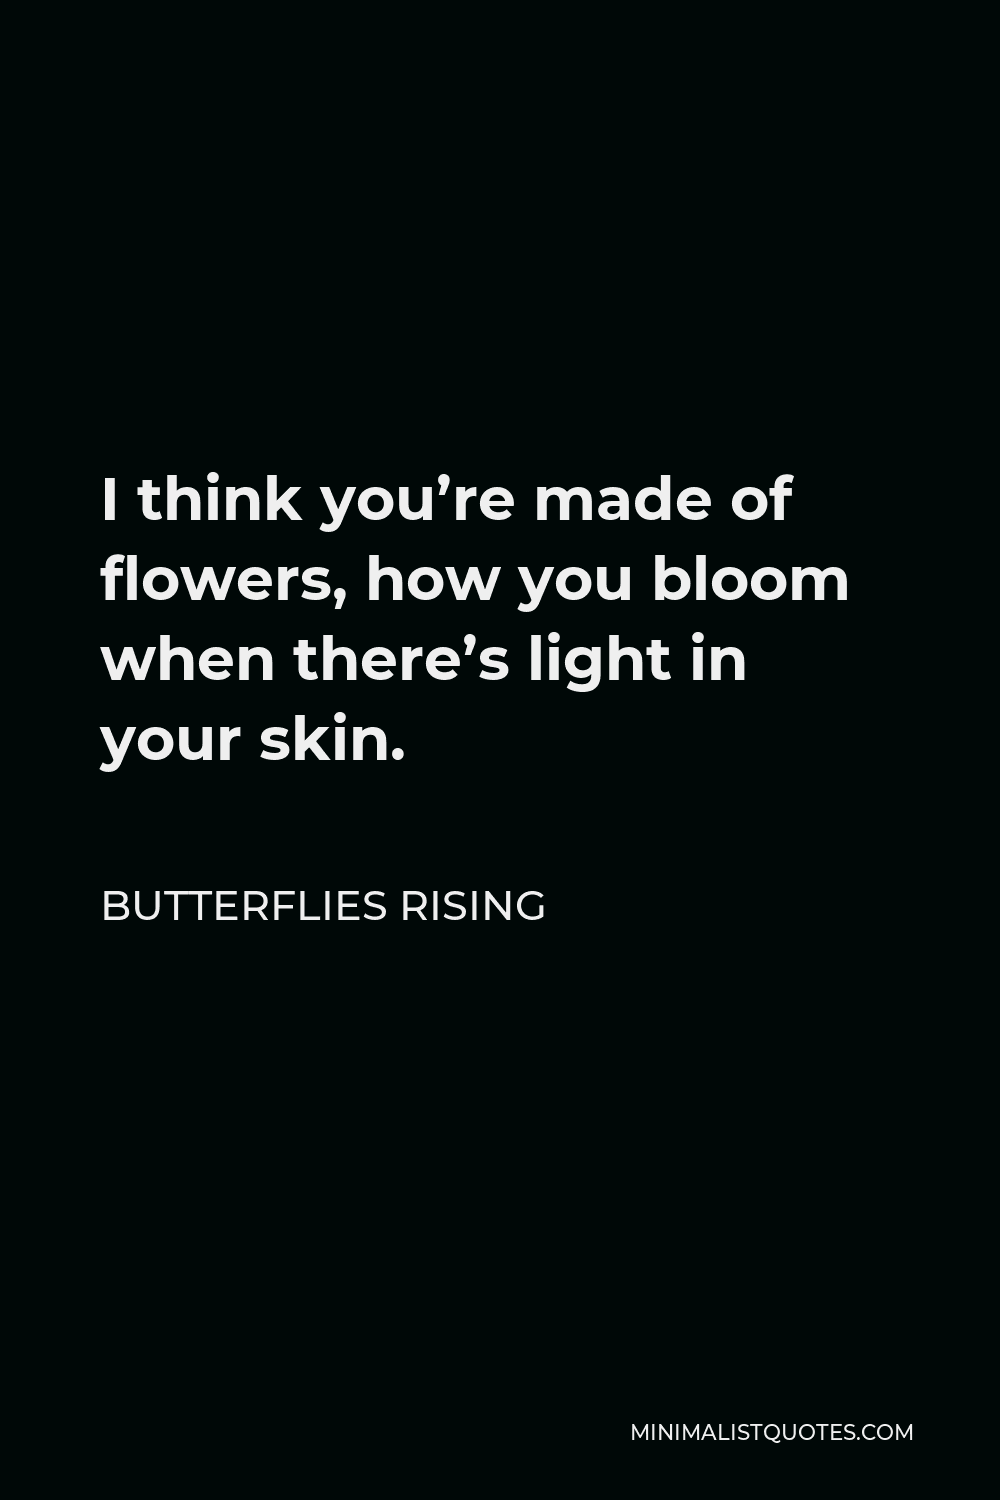 Butterflies Rising Quote - I think you’re made of flowers, how you bloom when there’s light in your skin.